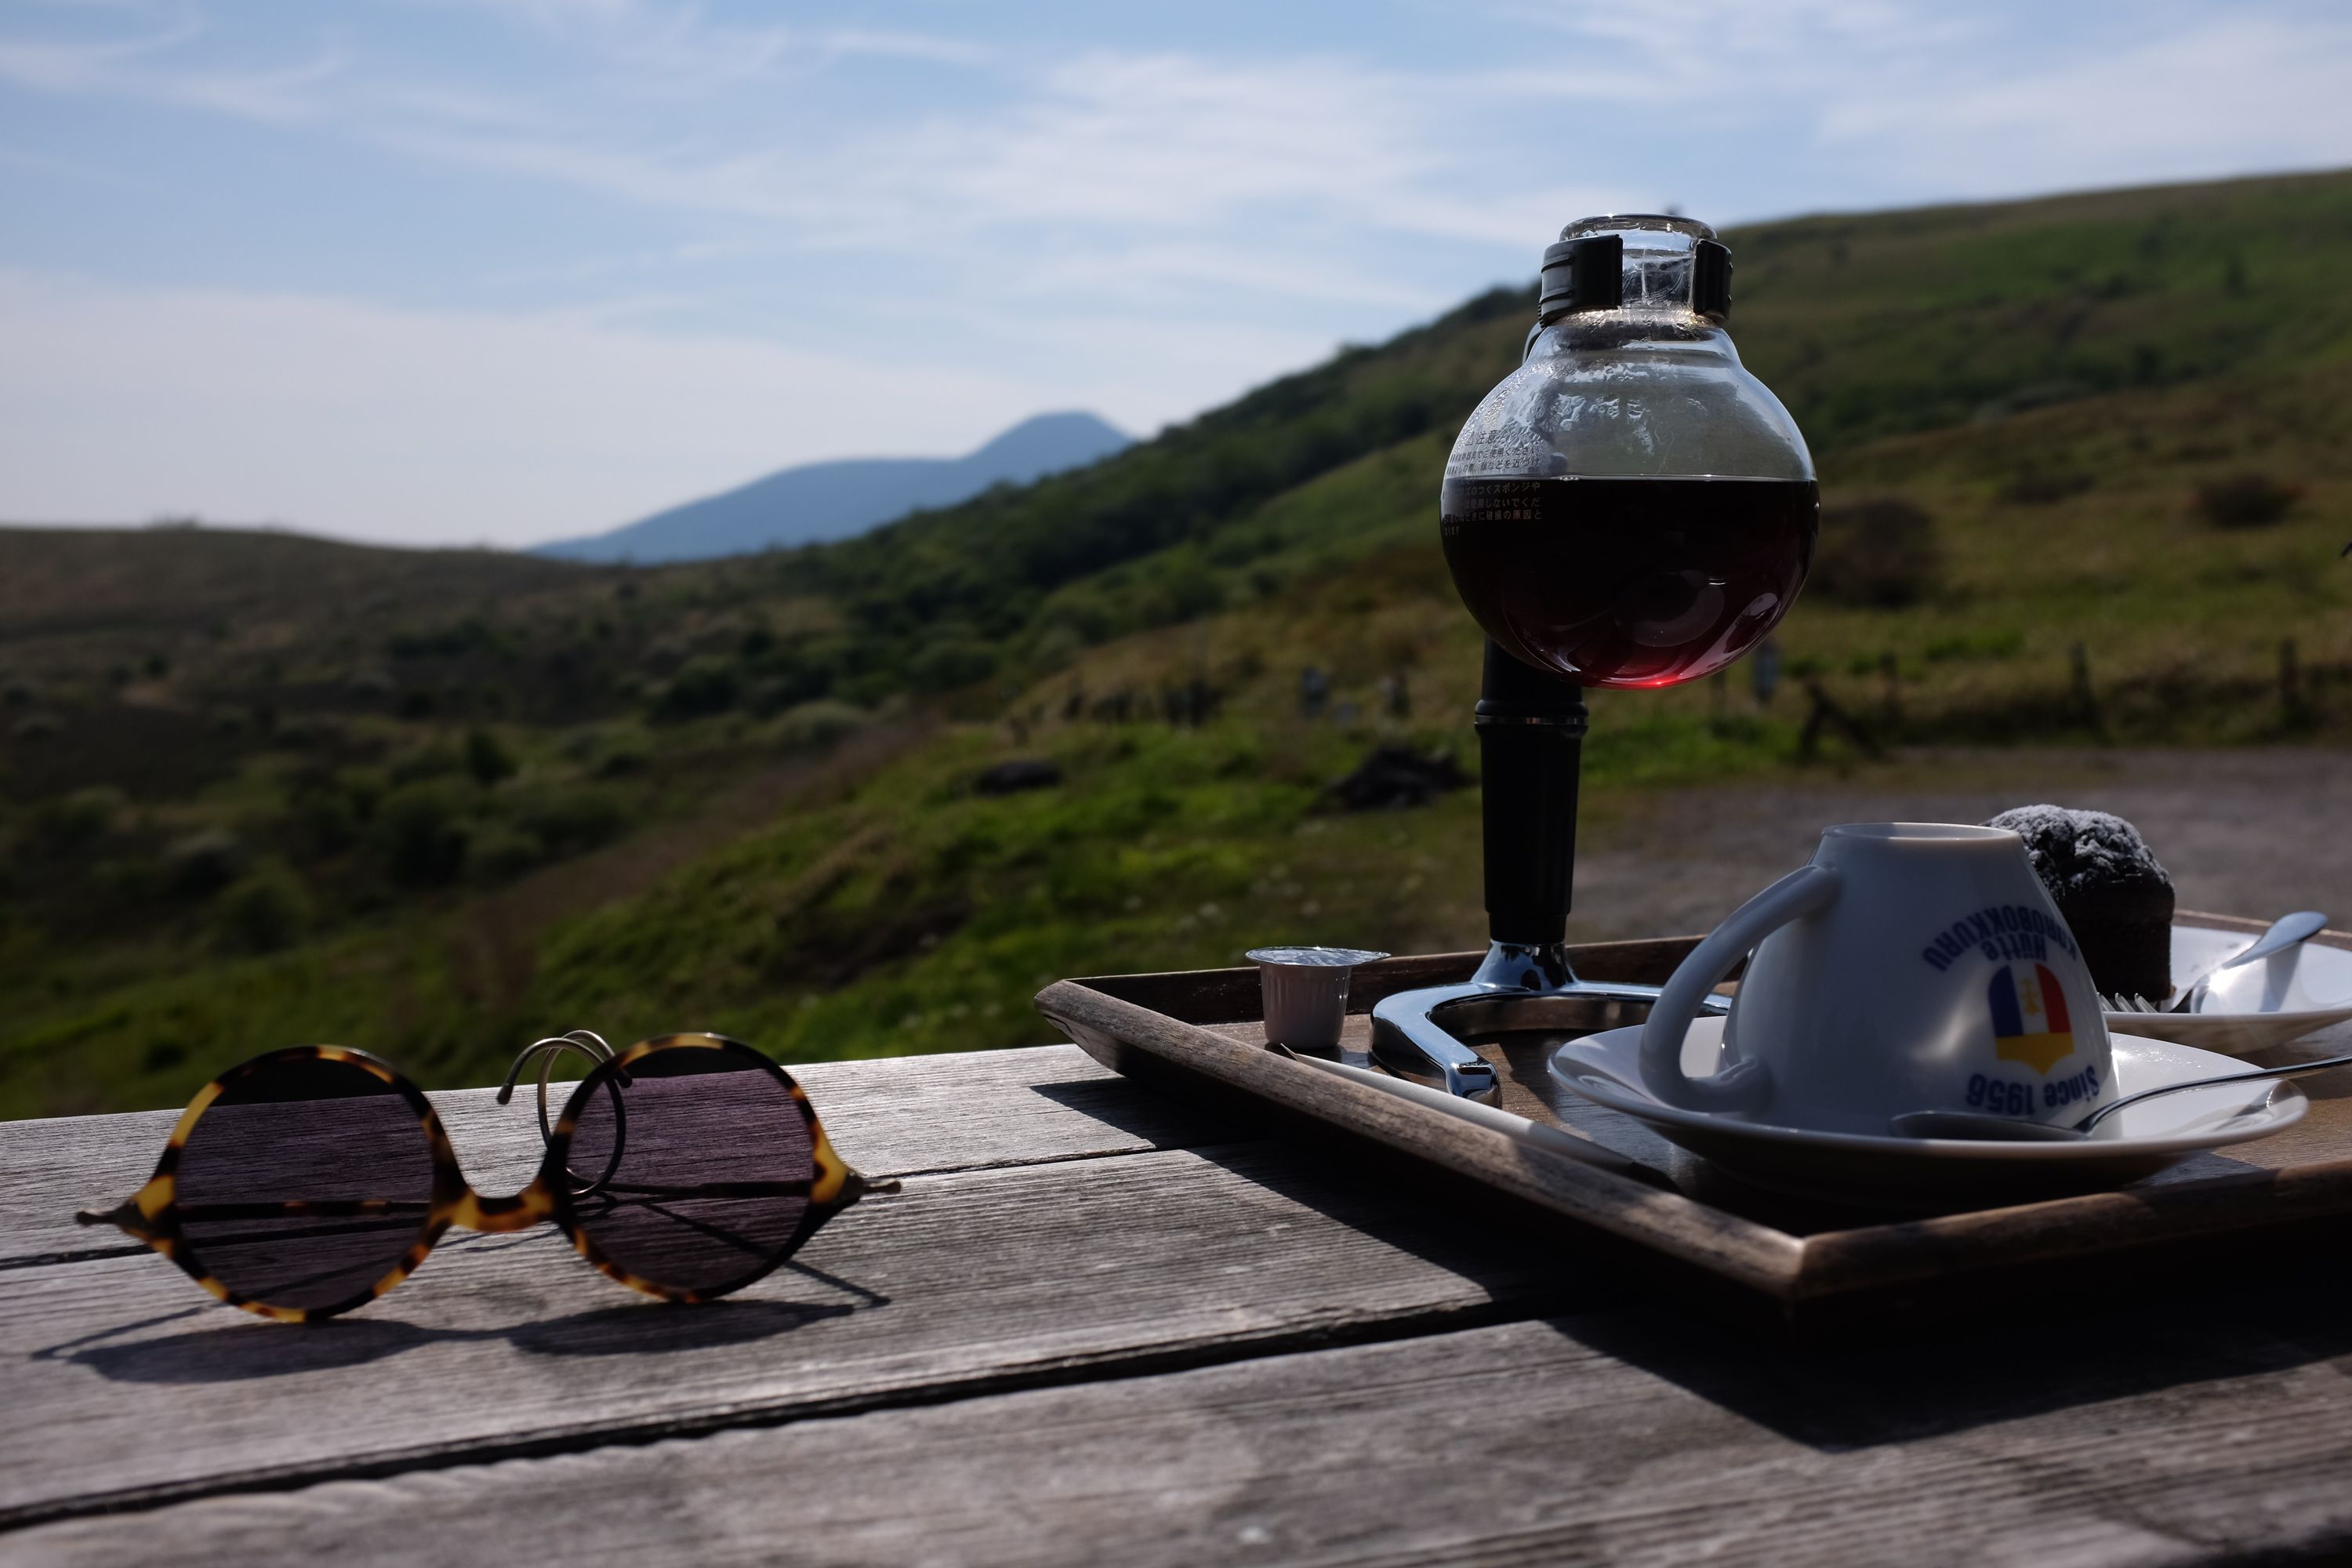 A pair of sunglasses and a siphon coffee pot on an outside table.